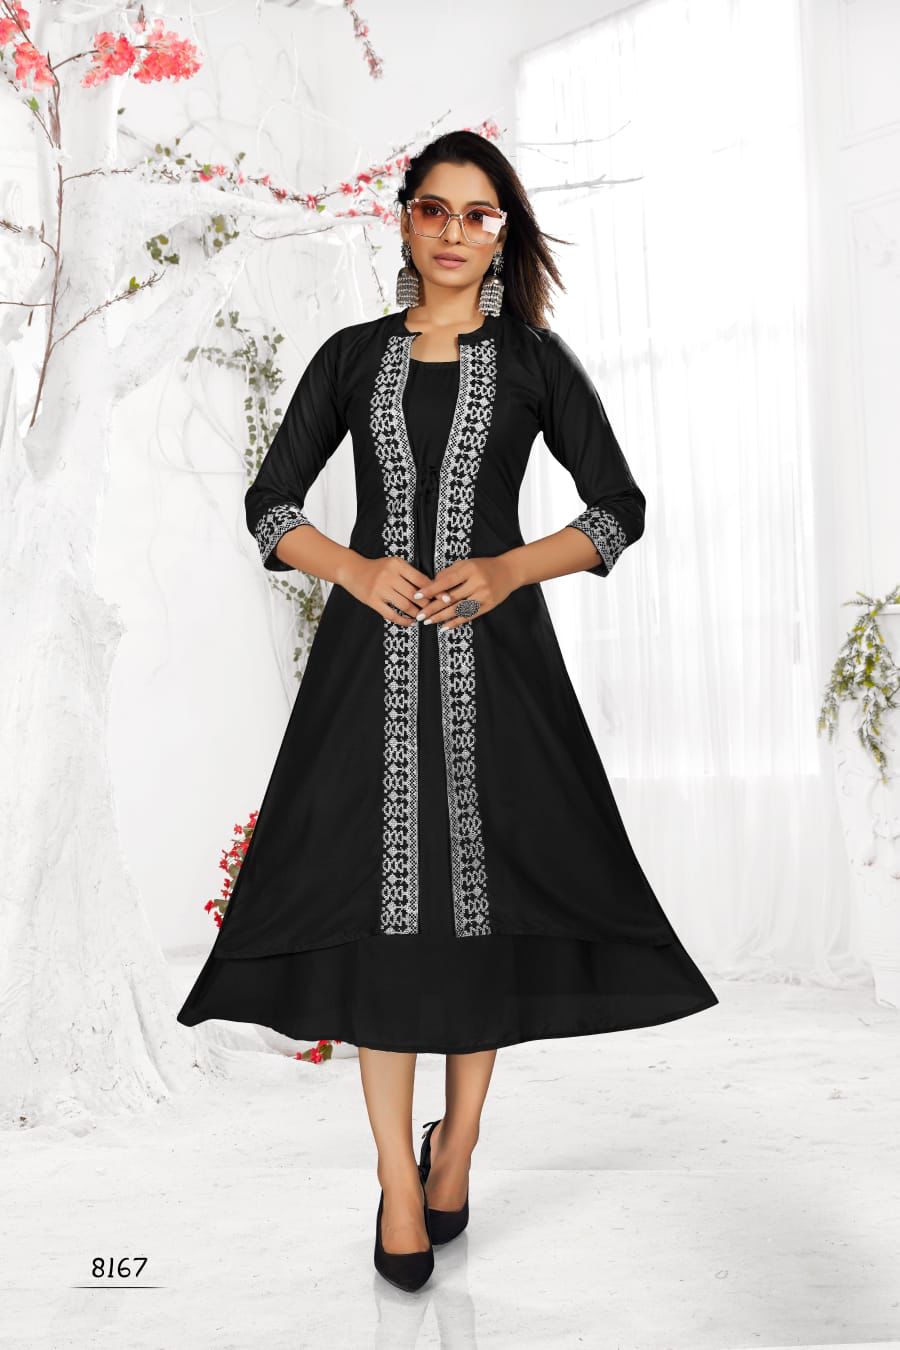 Classy Embroidered Party Wear Kurti